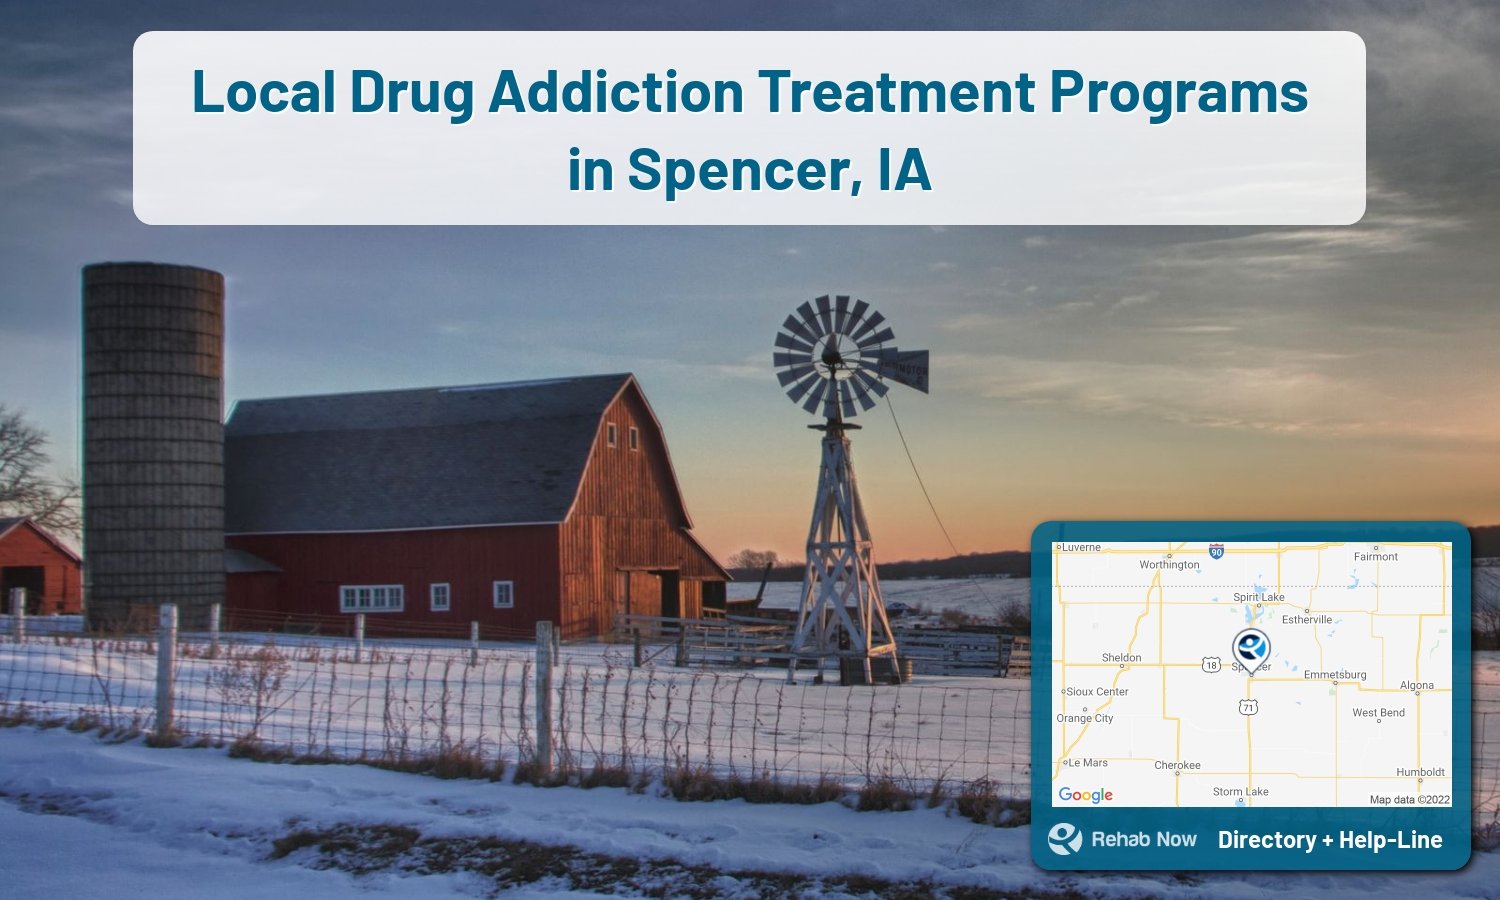 Spencer, IA Treatment Centers. Find drug rehab in Spencer, Iowa, or detox and treatment programs. Get the right help now!